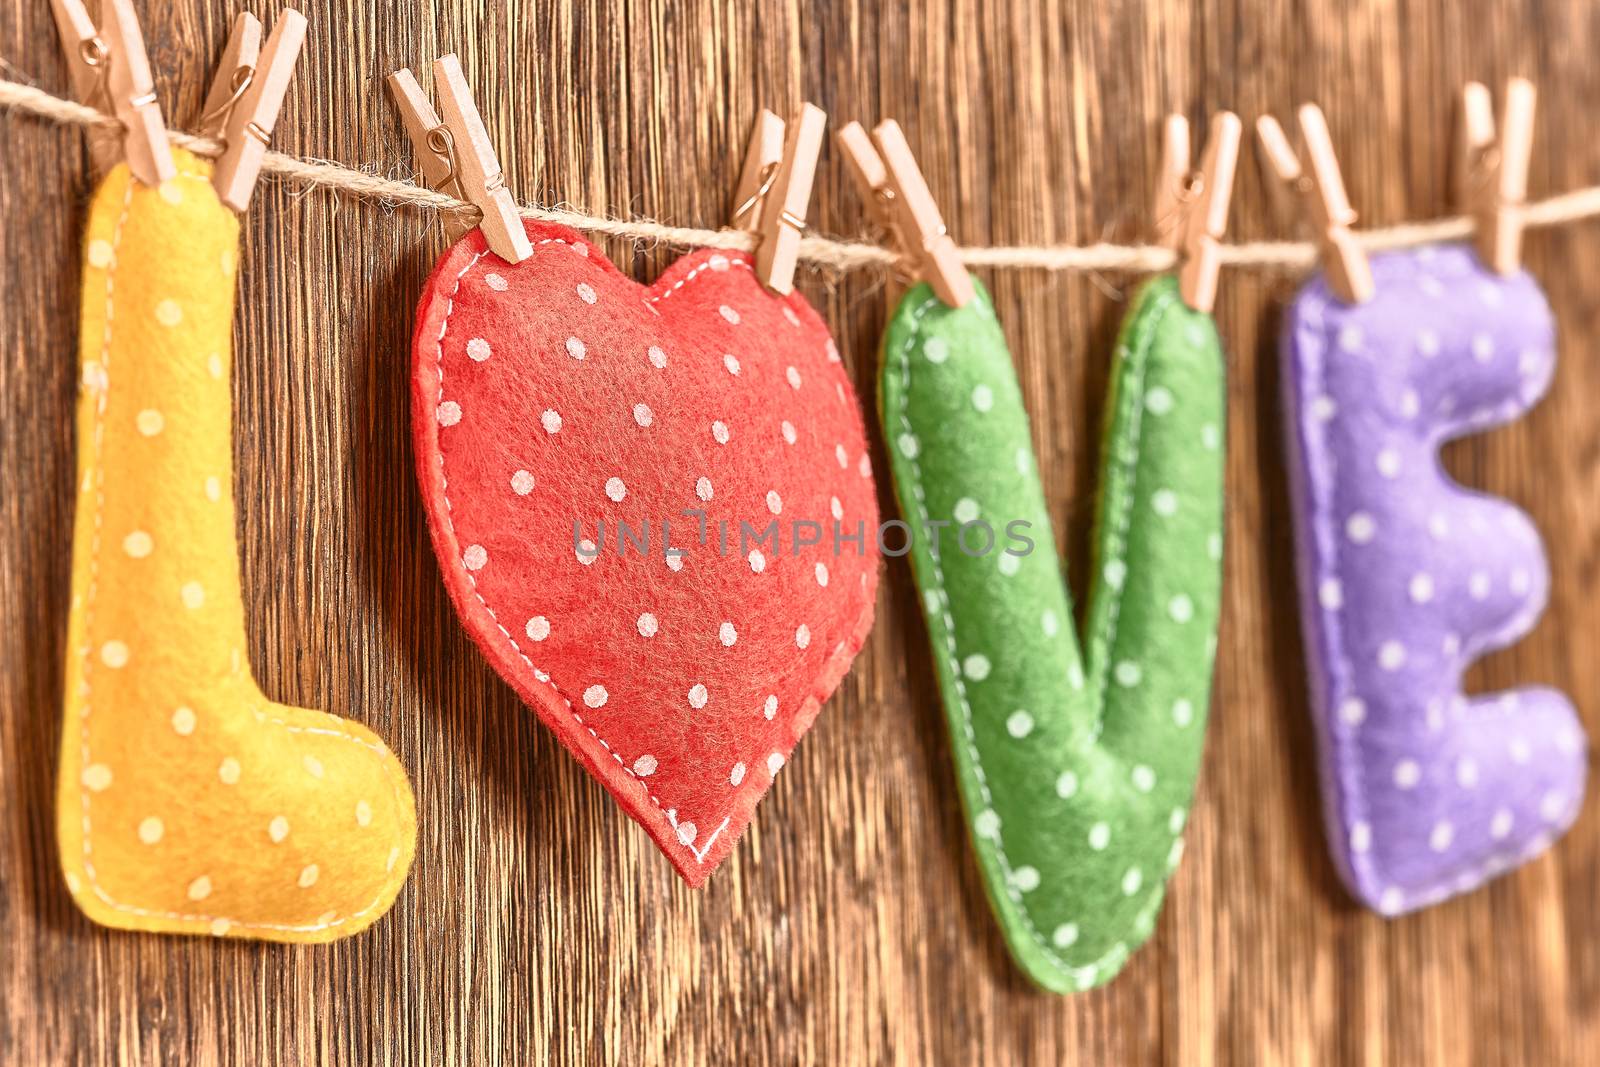 Love, Valentines Day. Word Love polka dots, Heart Handmade, hanging on rope. Retro vintage romantic style, wooden background, toned. Vivid unusual creative greeting card, multicolored felt